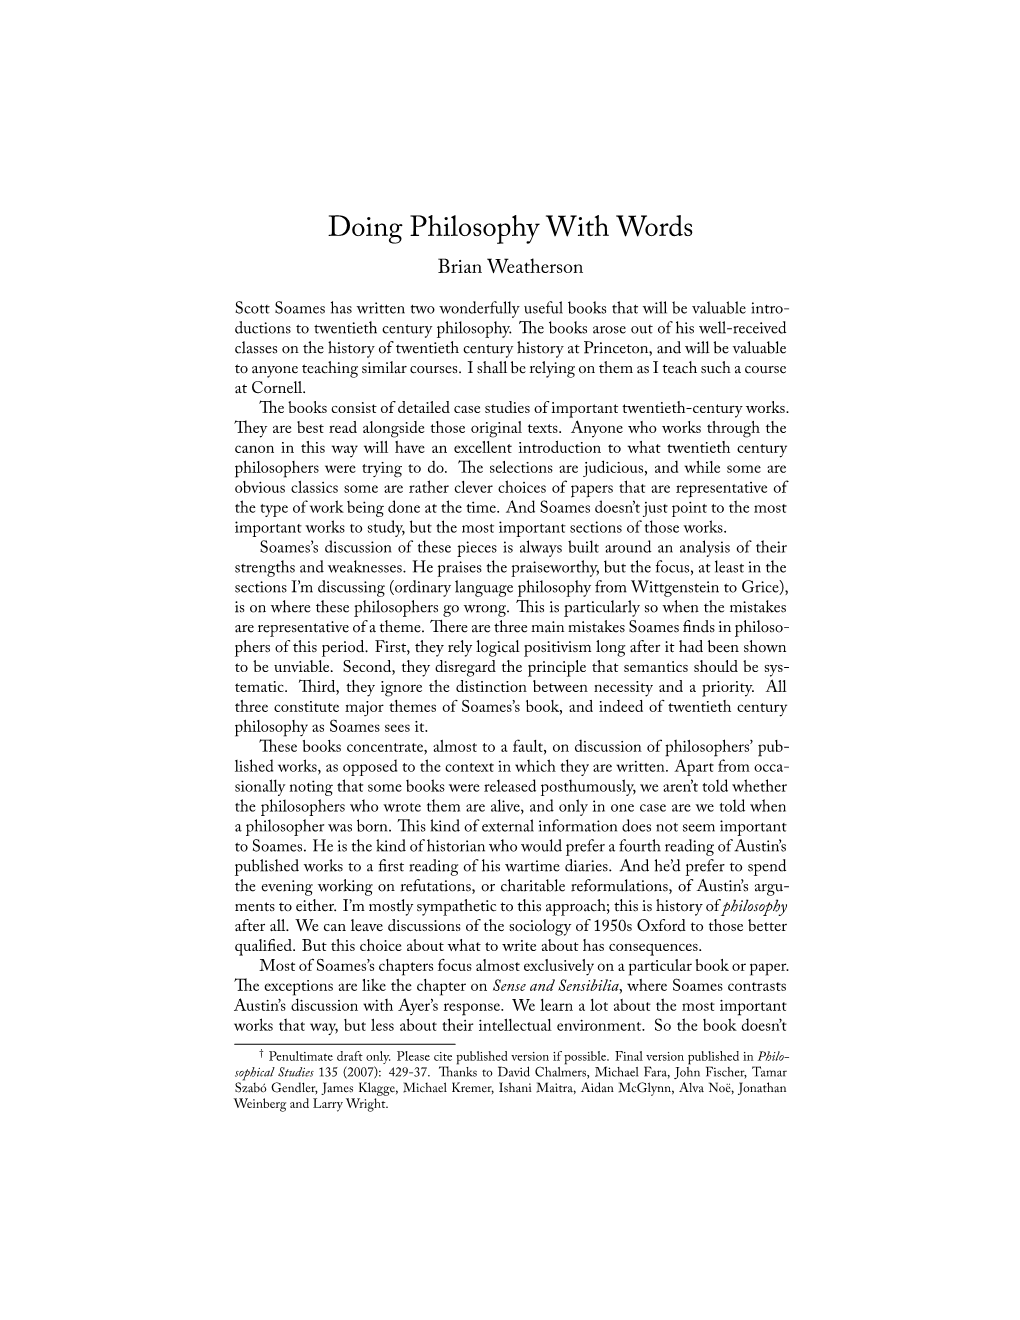 Doing Philosophy with Words Brian Weatherson